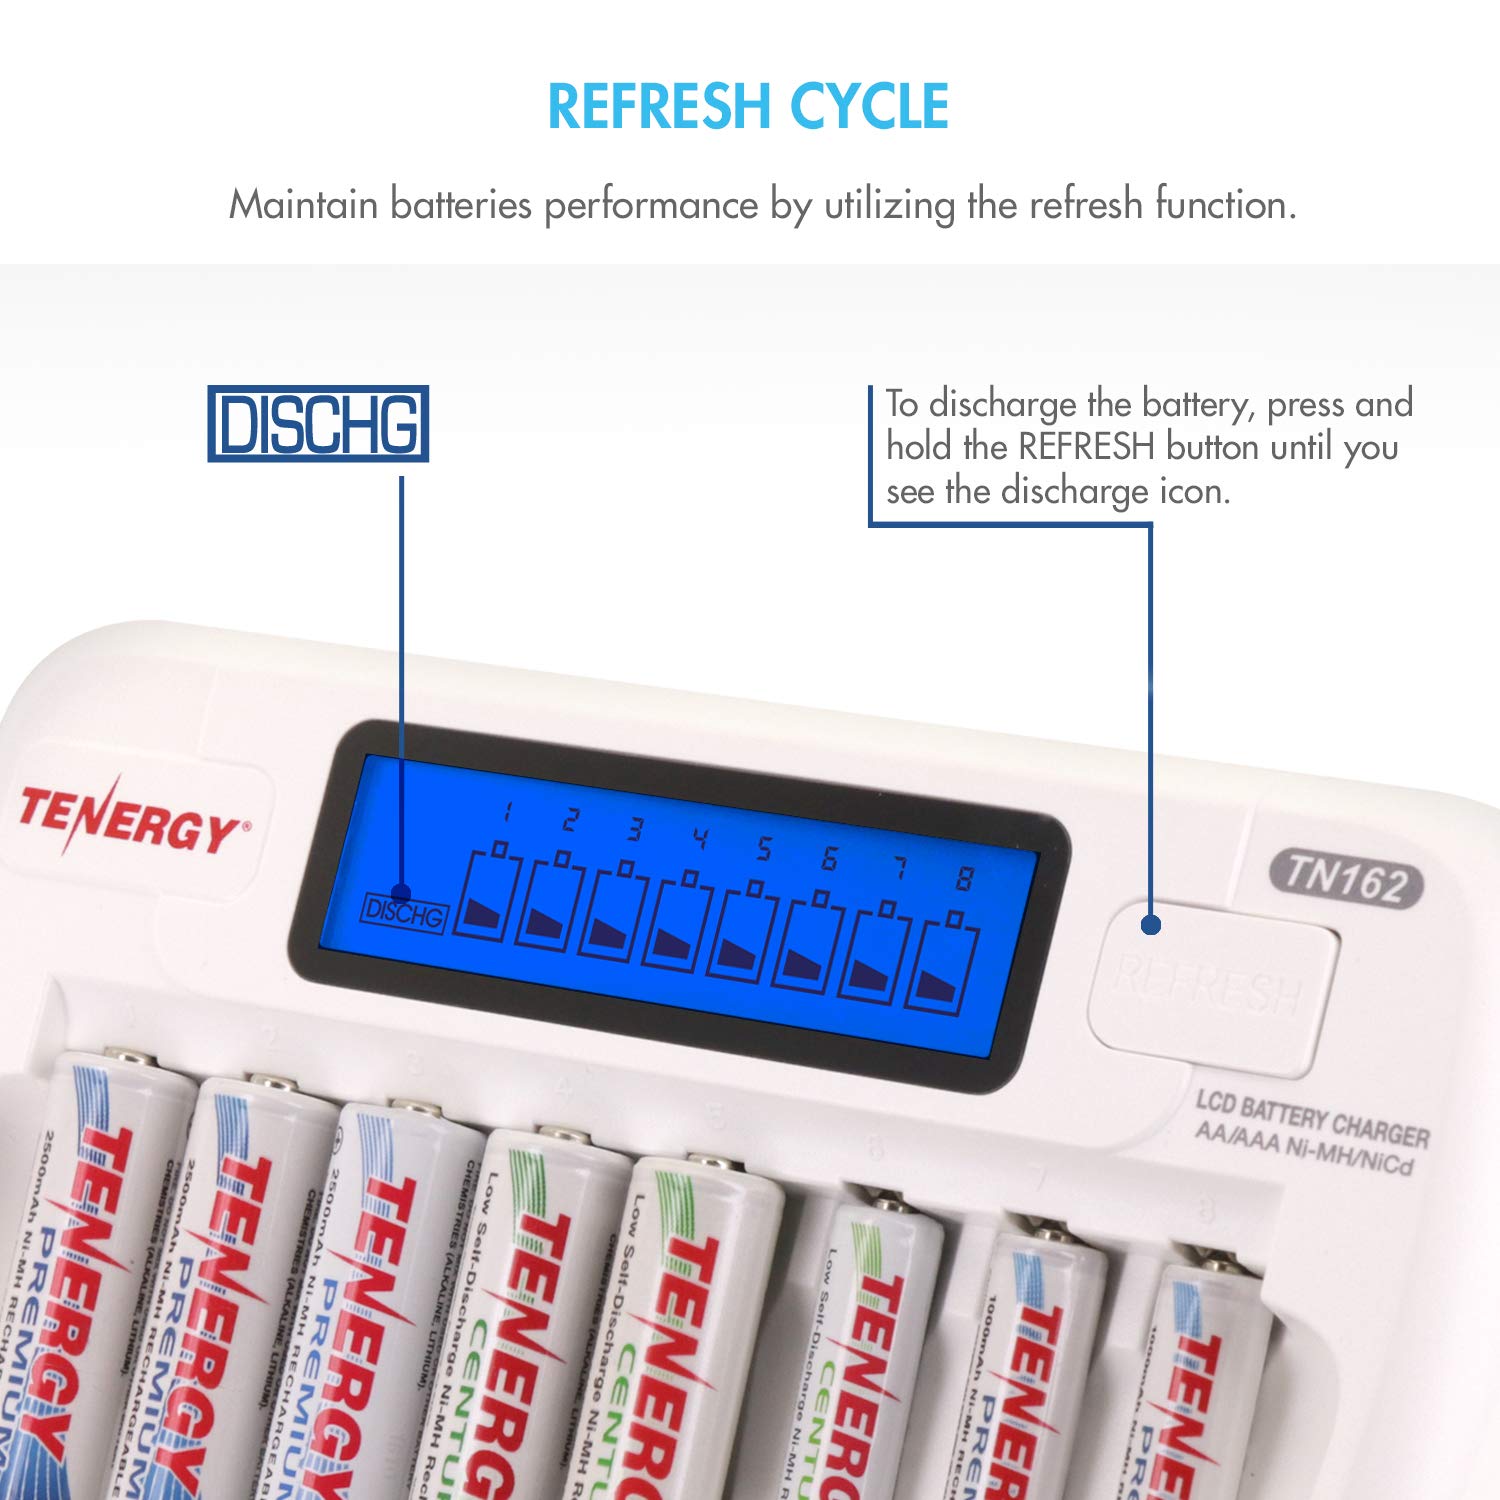 Tenergy TN162 8-Bay Smart LCD Battery Charger for Rechargeable AA/AAA NiMH/NiCd Batteries